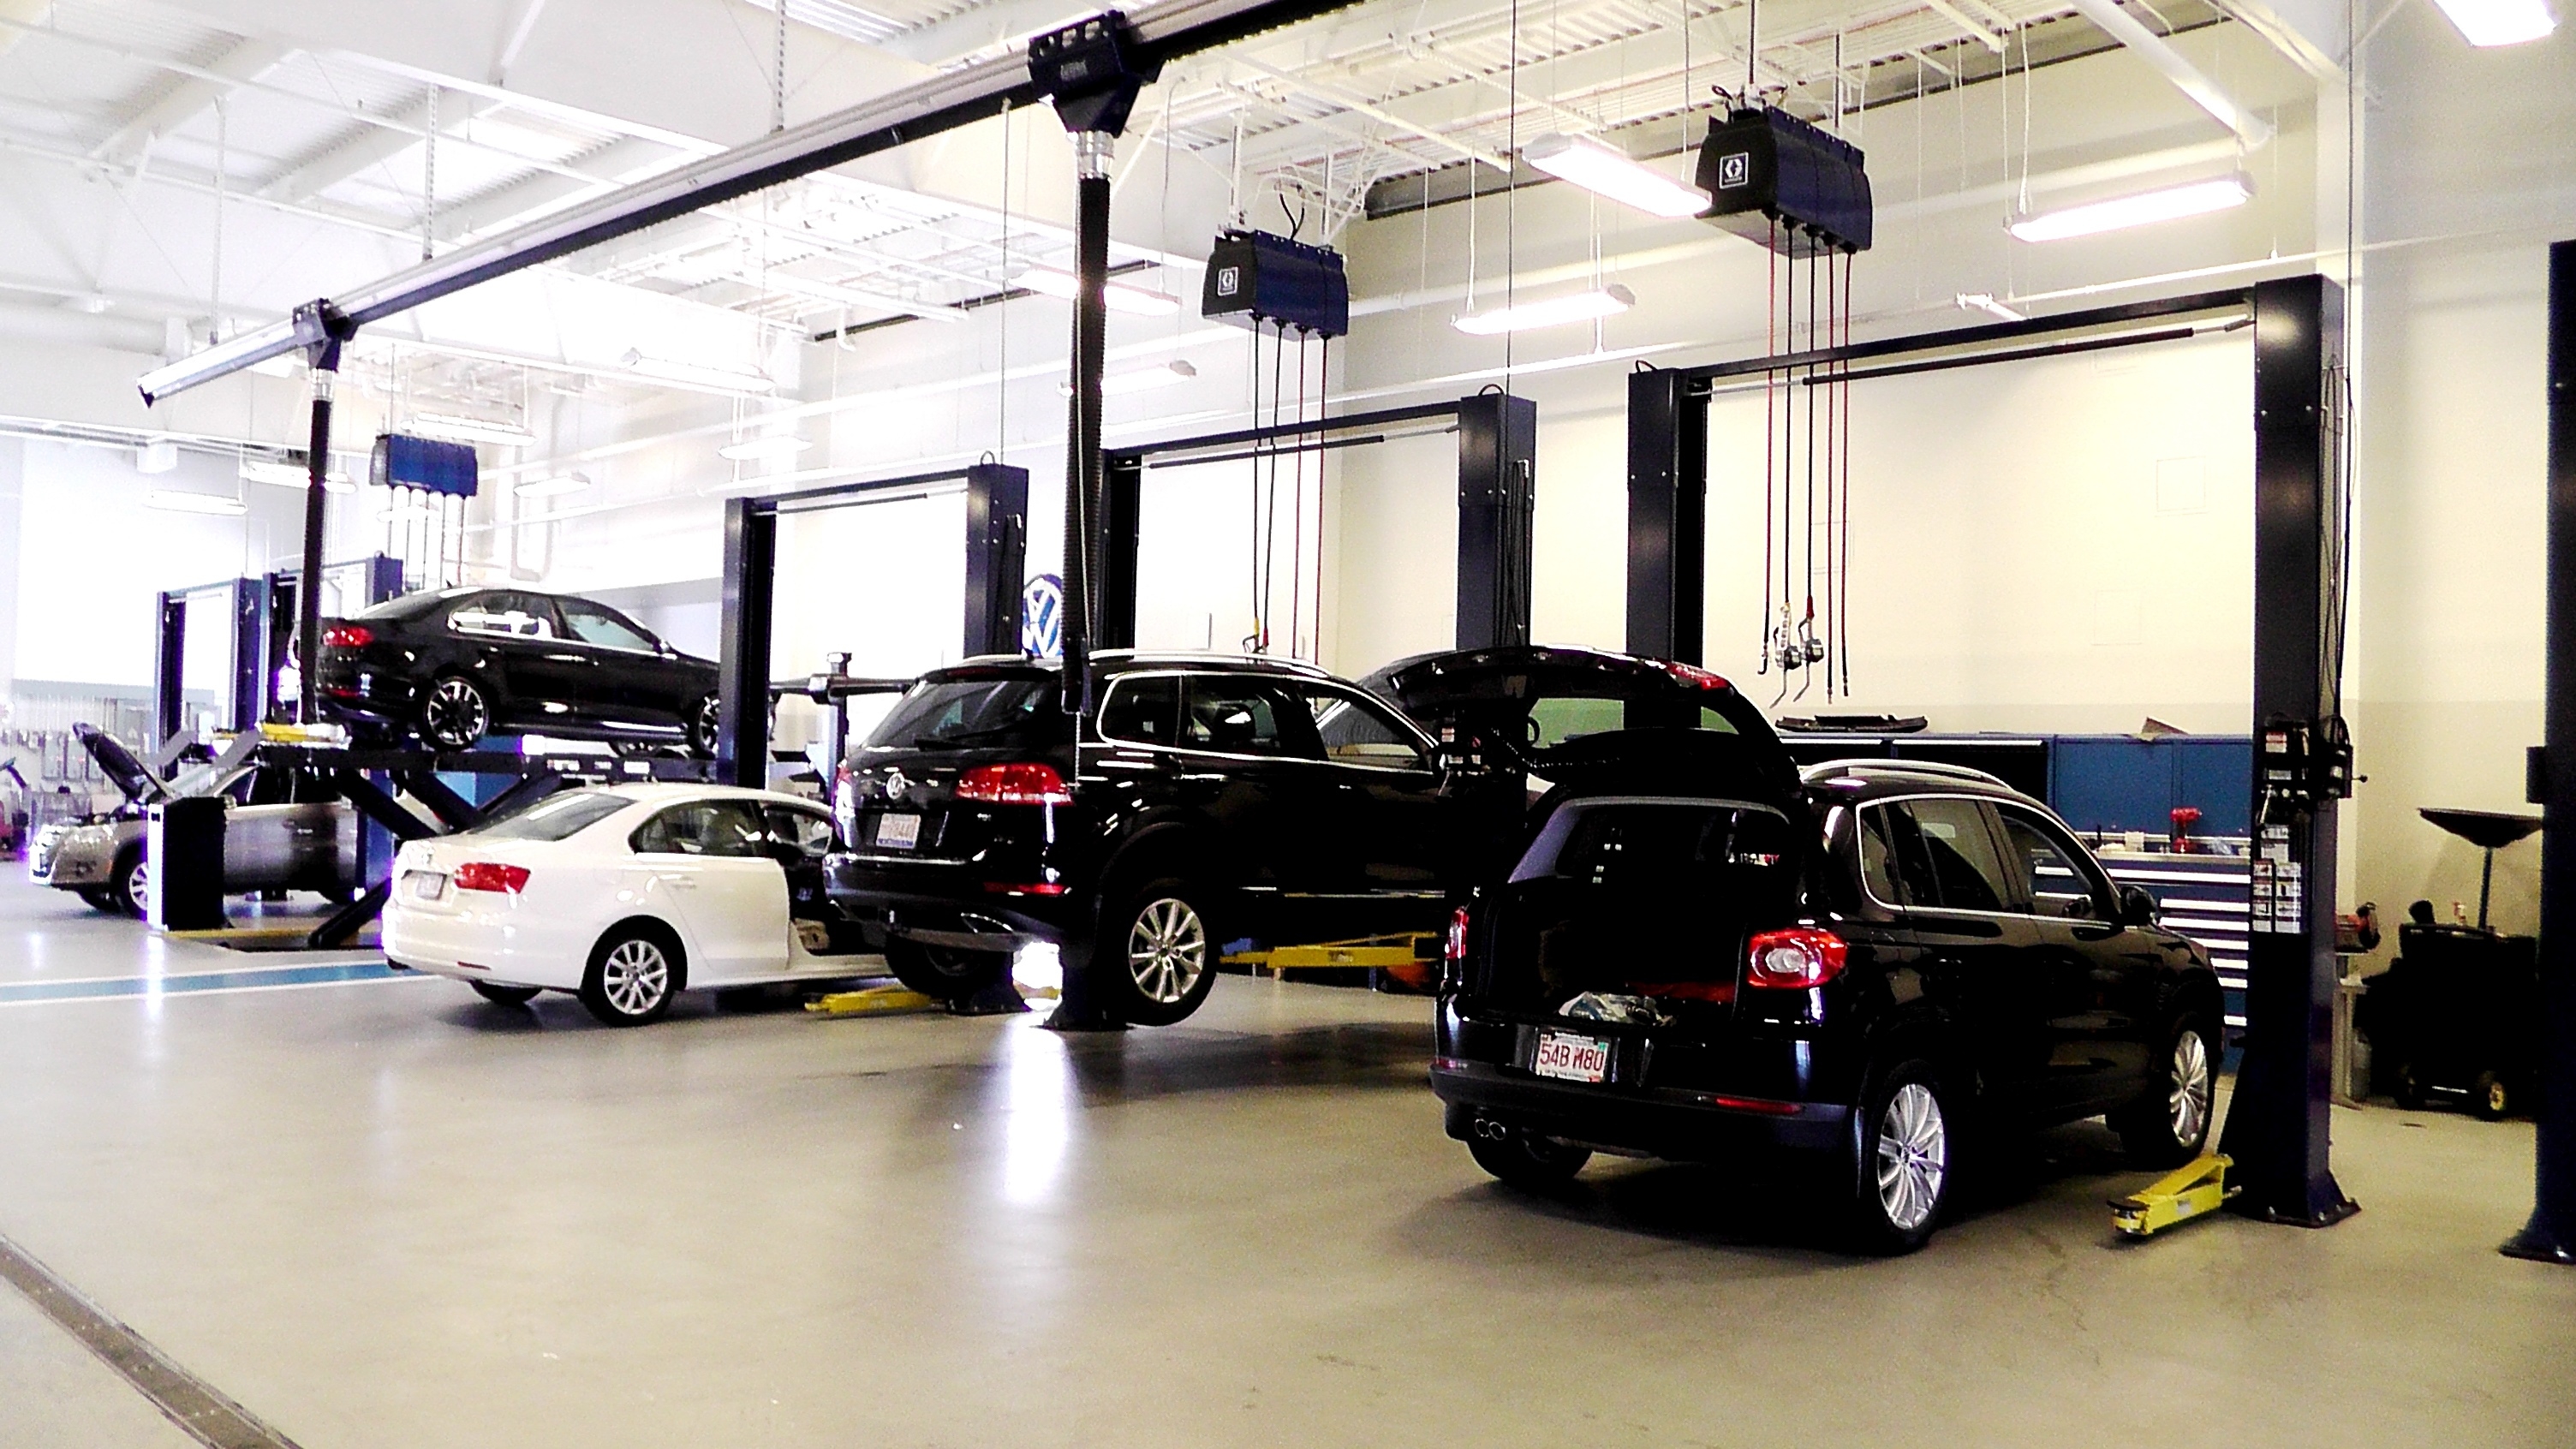 You won't find a more state-of-the-art Volkswagen service facility in the country. Our VW service technicians at Kelly Volkswagen have the finest tools available to make the necessary repairs to your vehicle. Visit our Volkswagen service center today and let our professionals help you out.